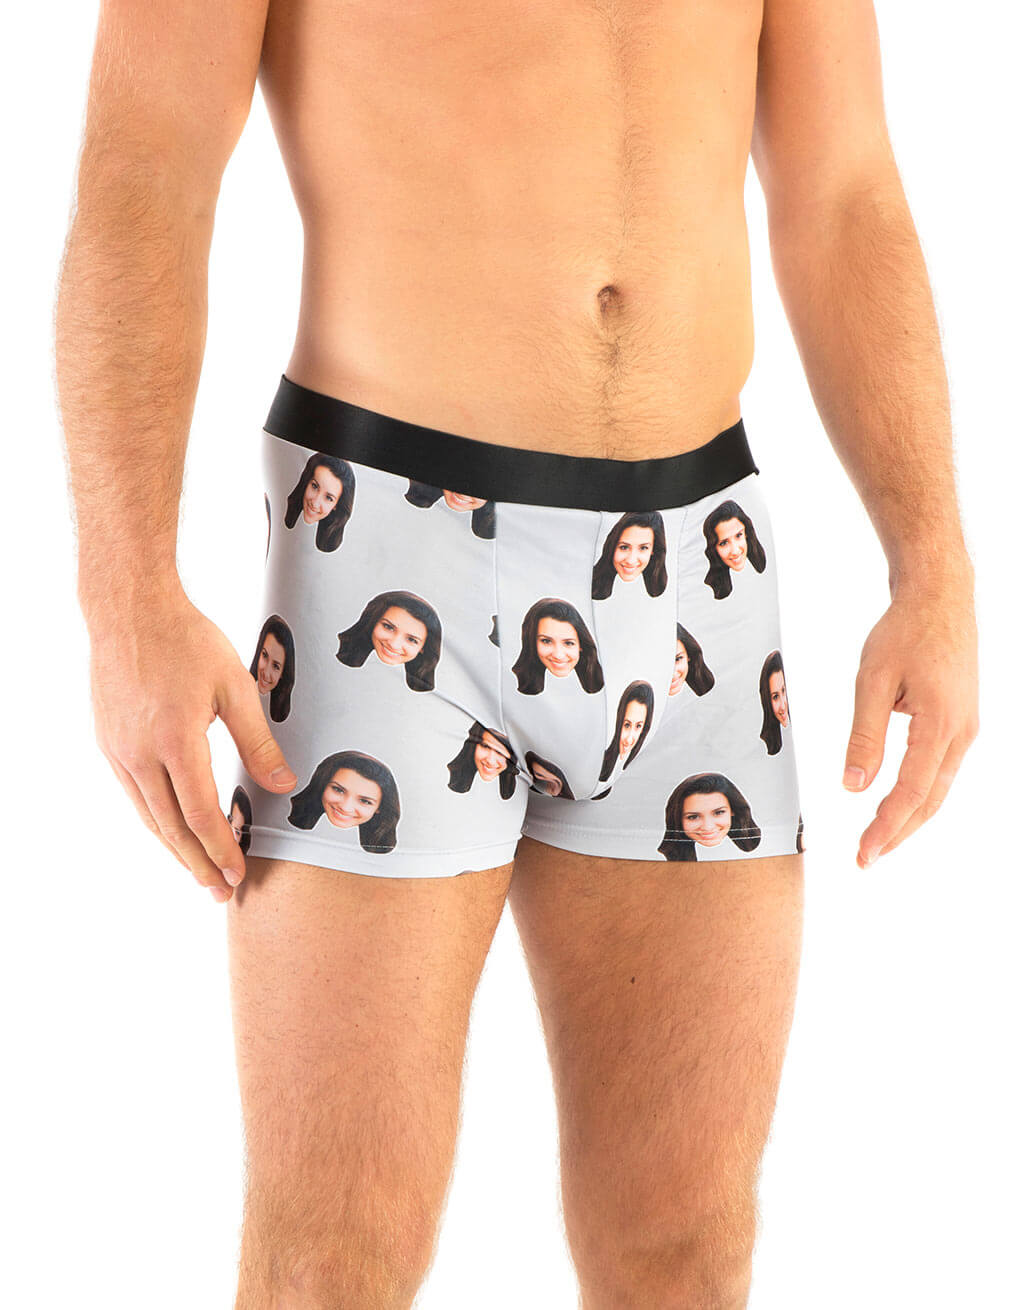 Custom Boxers shorts with your photo